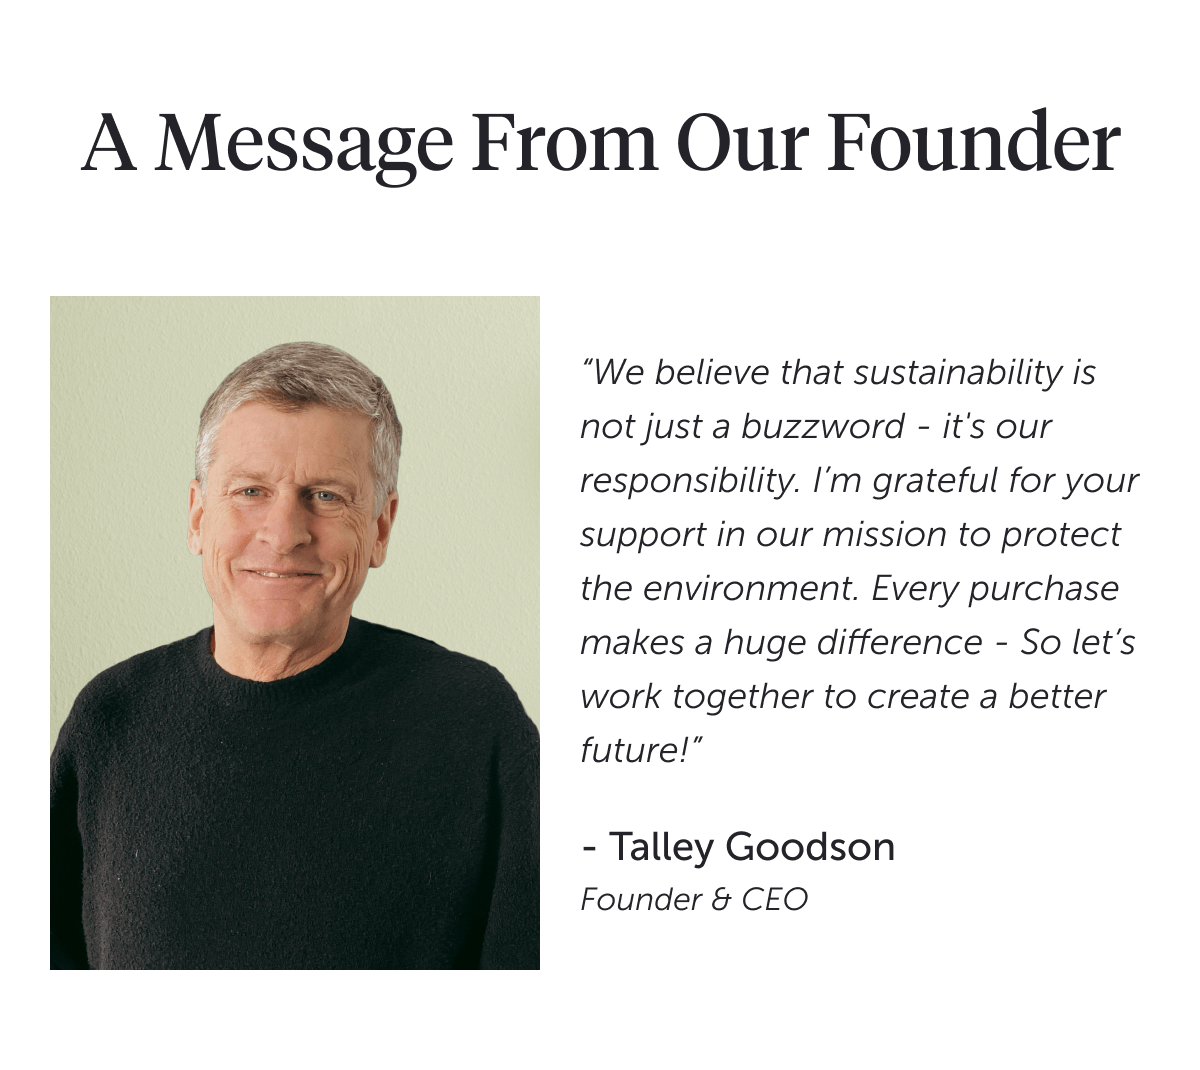 A message from our founder “We believe that sustainability is not just a buzzword - it's our responsibility. I’m grateful for your support in our mission to protect the environment. Every purchase makes a huge difference - So let’s work together to create a better future!” - Talley Goodson Founder & CEO